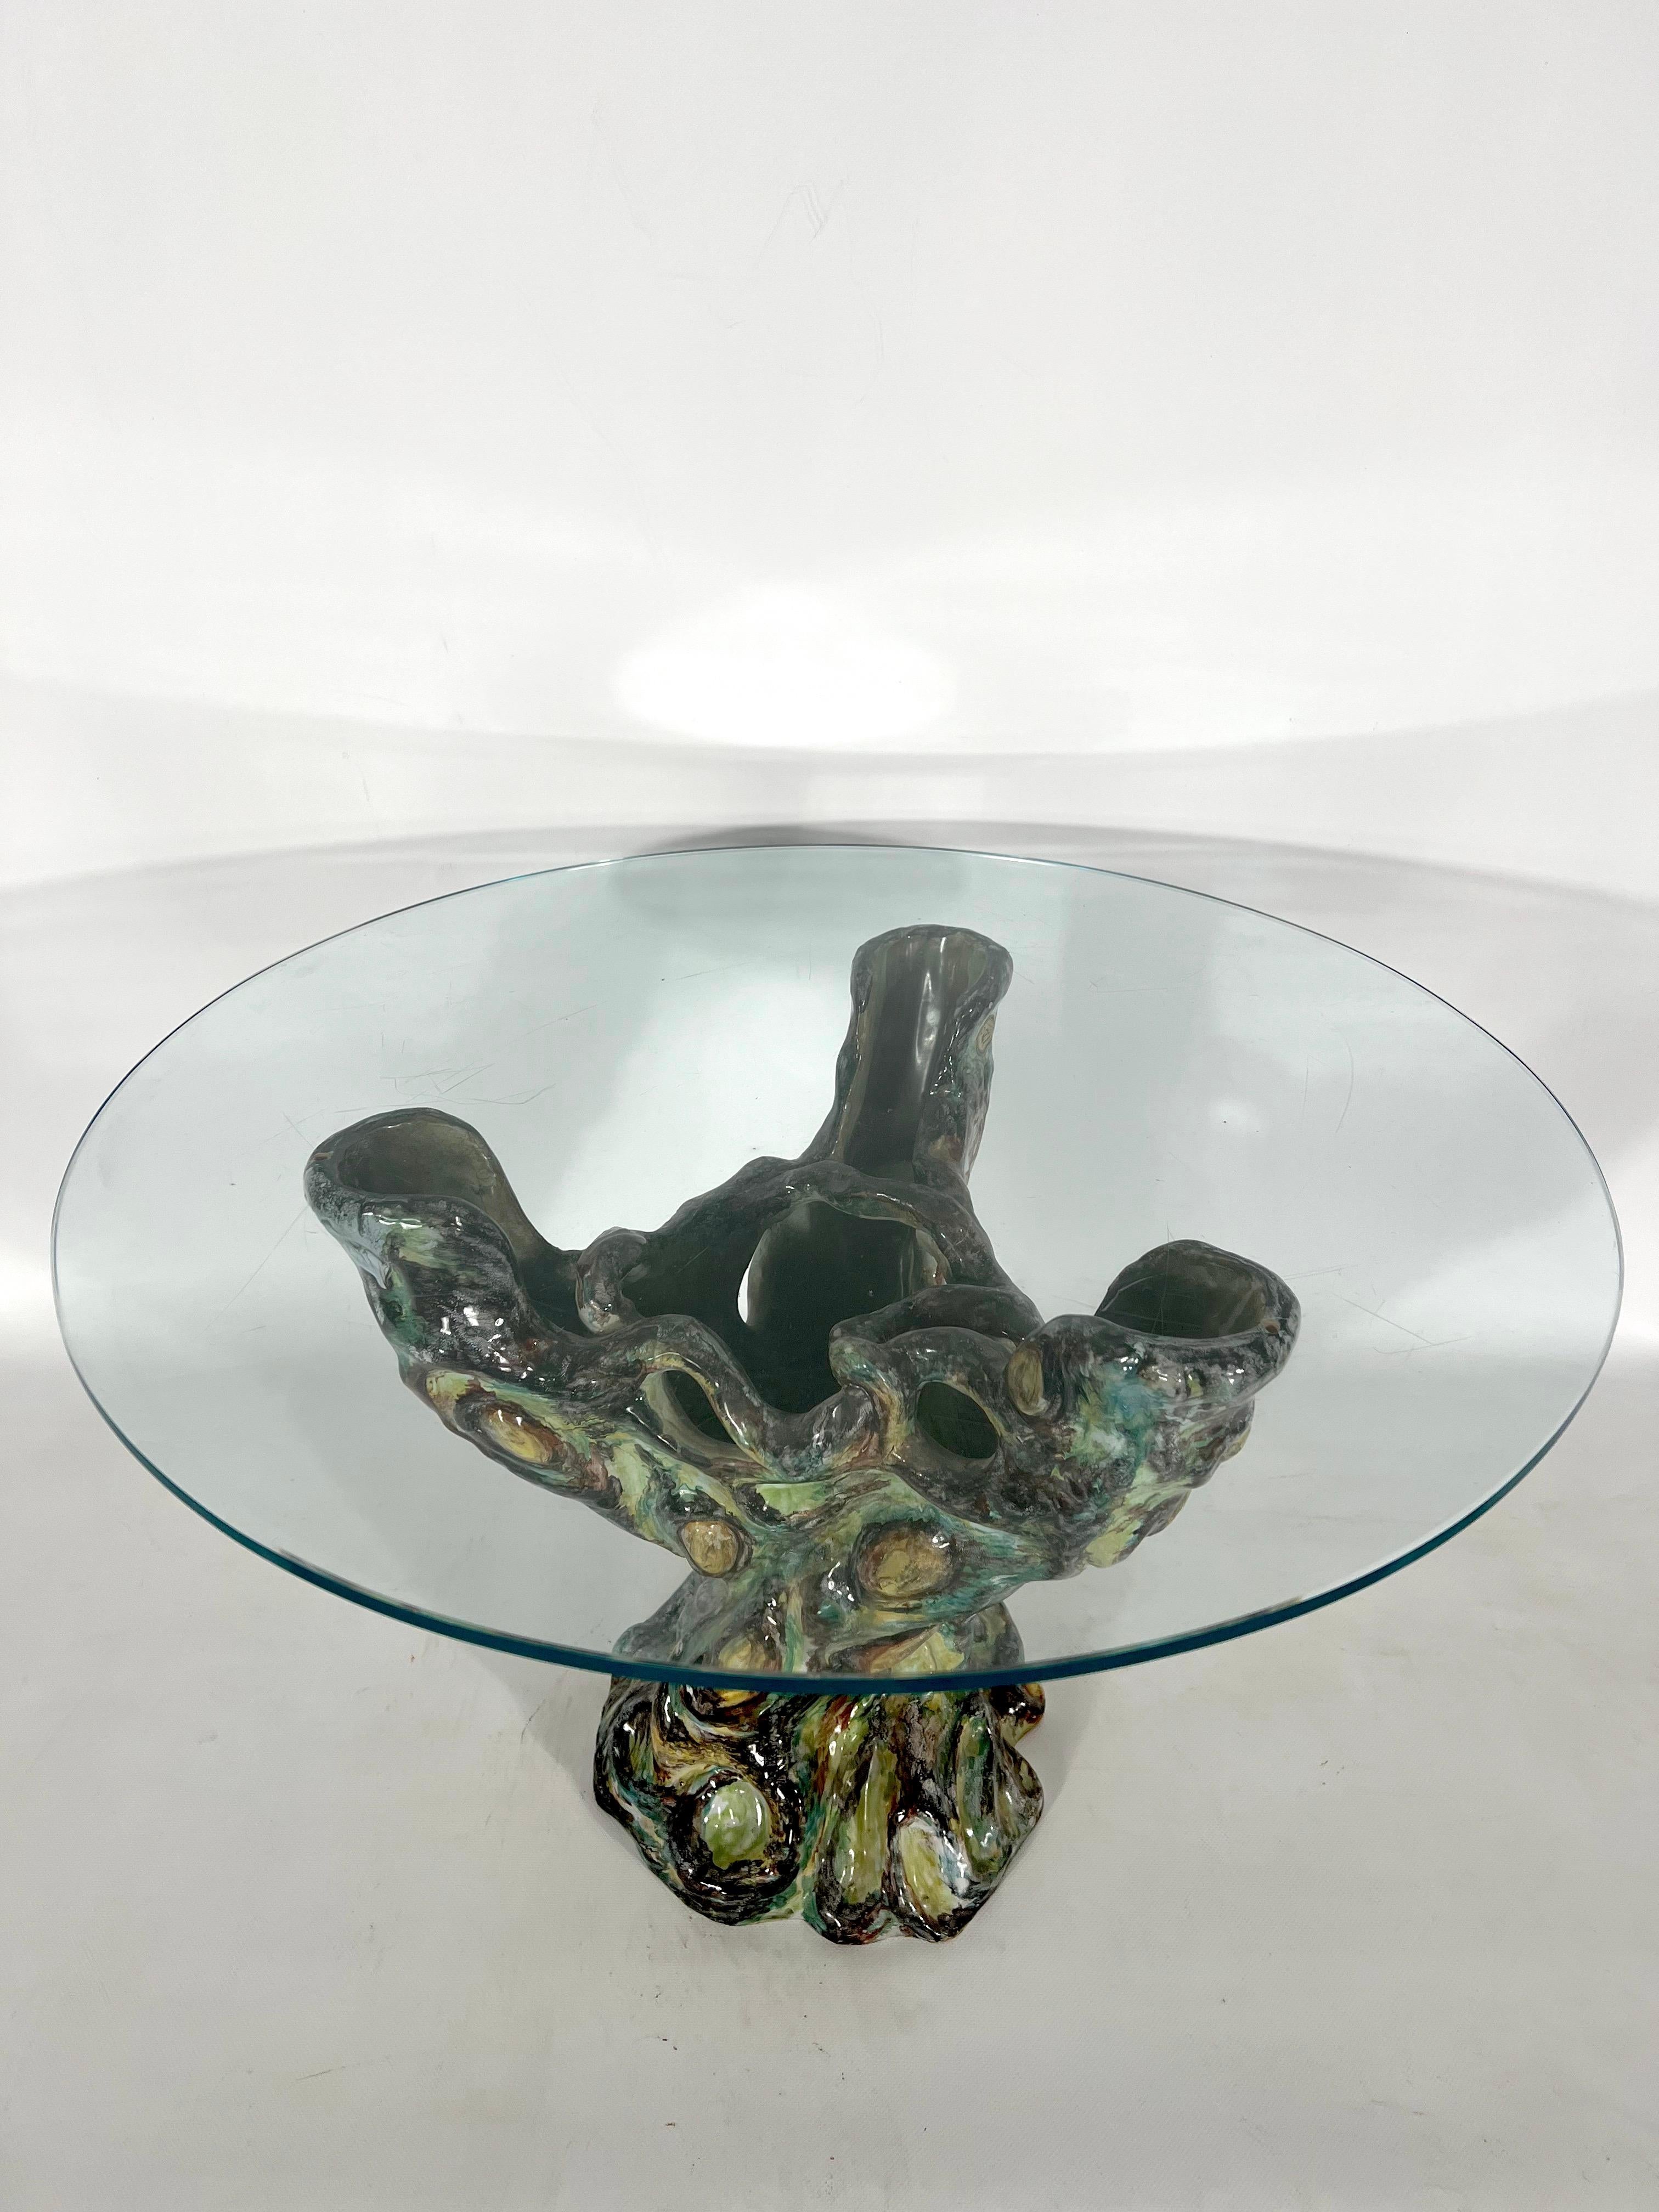 Vintage Sculptural Modern Ceramic Coffee Table, Italy, 1950s For Sale 13